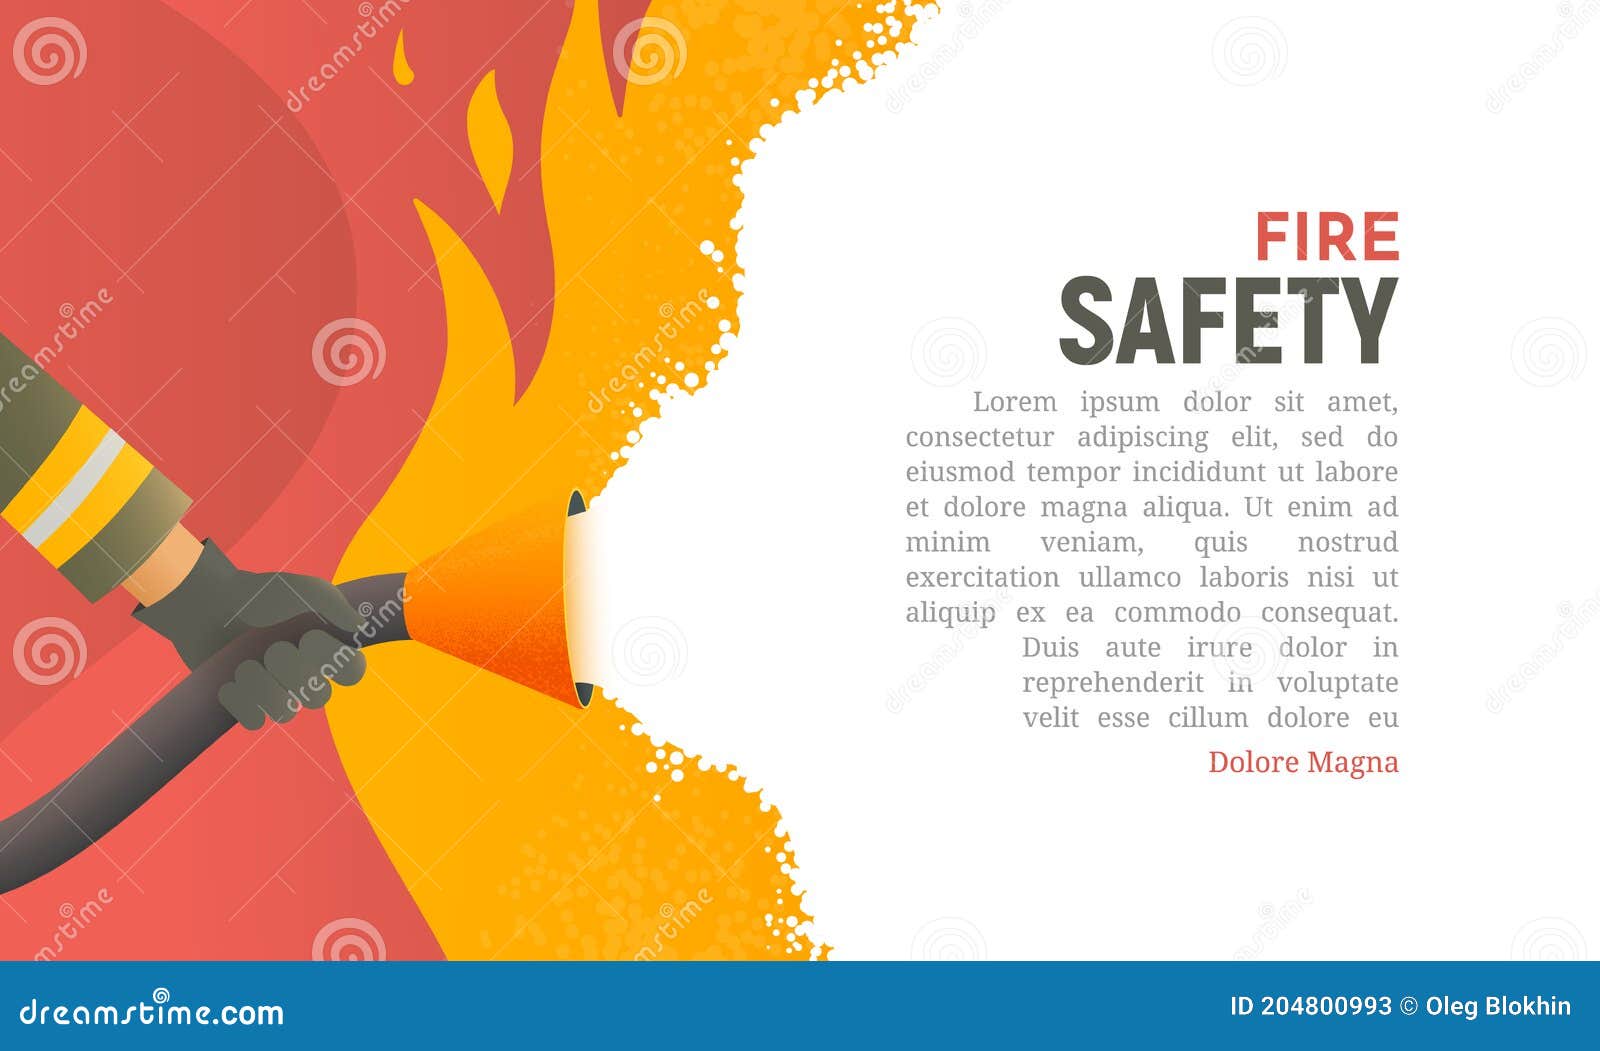 fire safety  . precautions the use of fire background template. a firefighter fights a fire cartoon